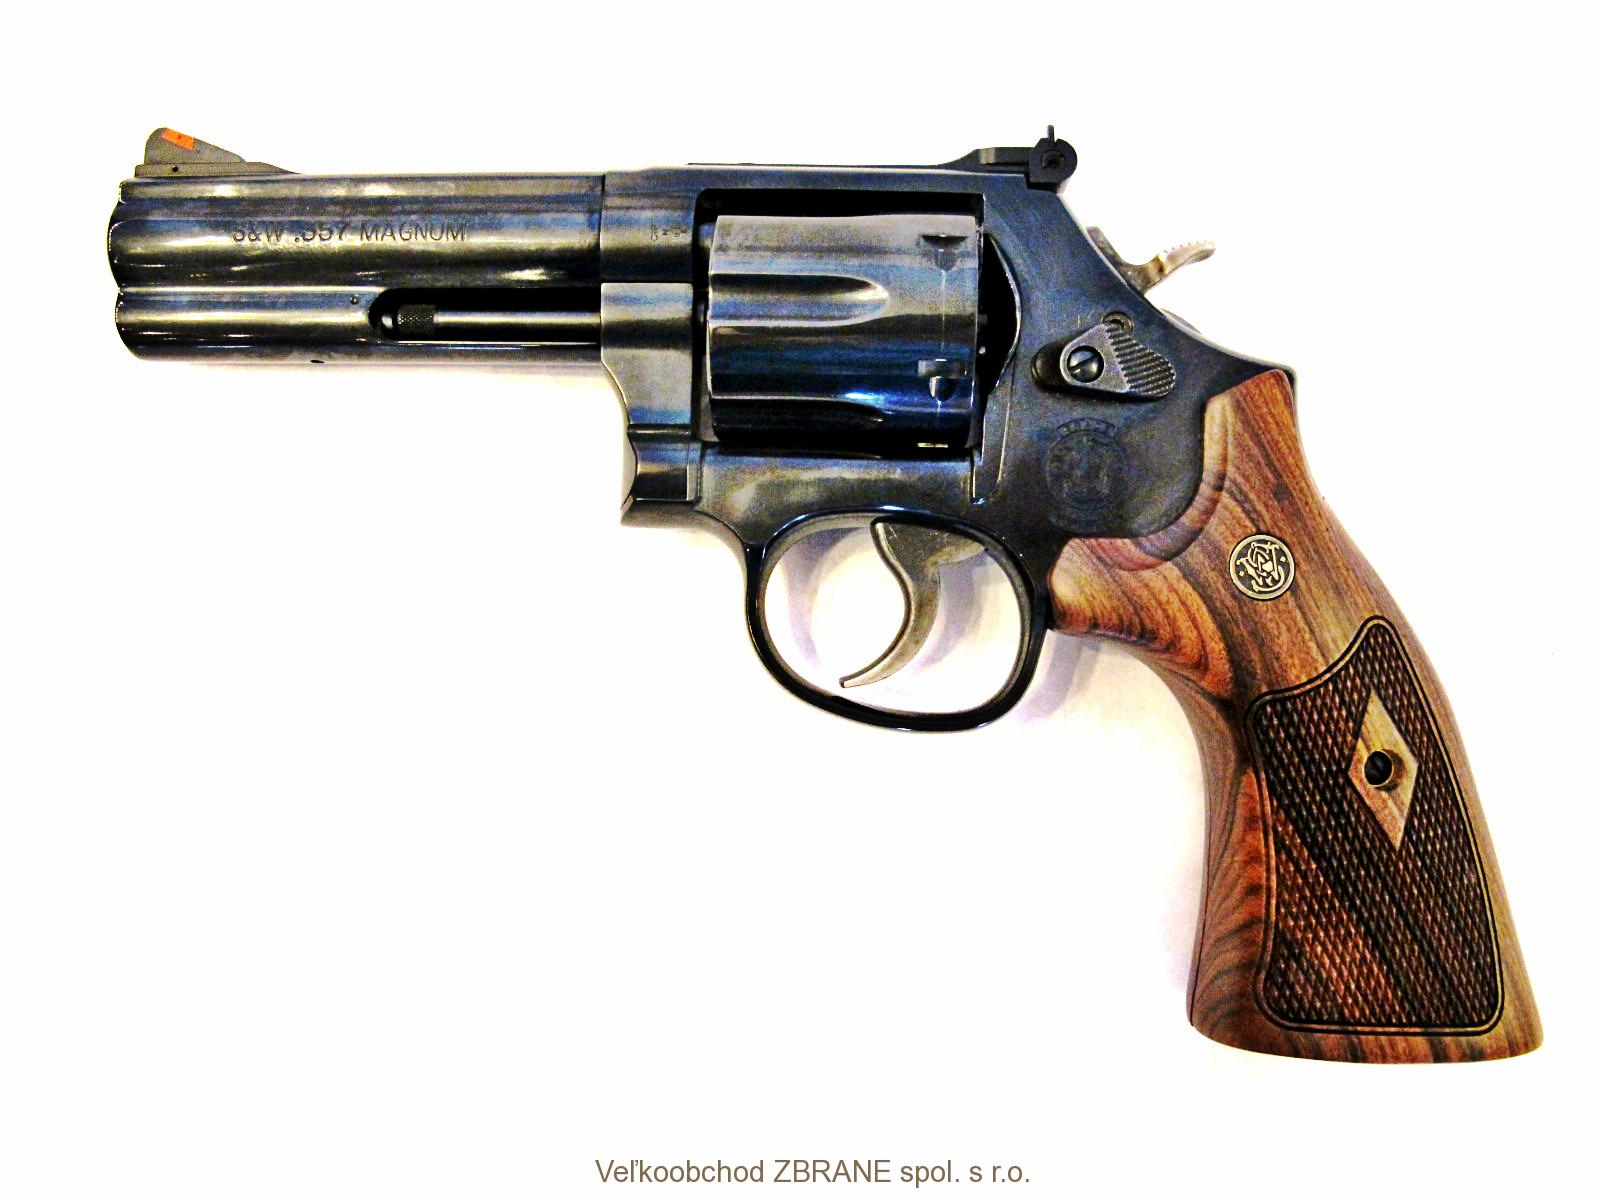 Smith & Wesson model 586